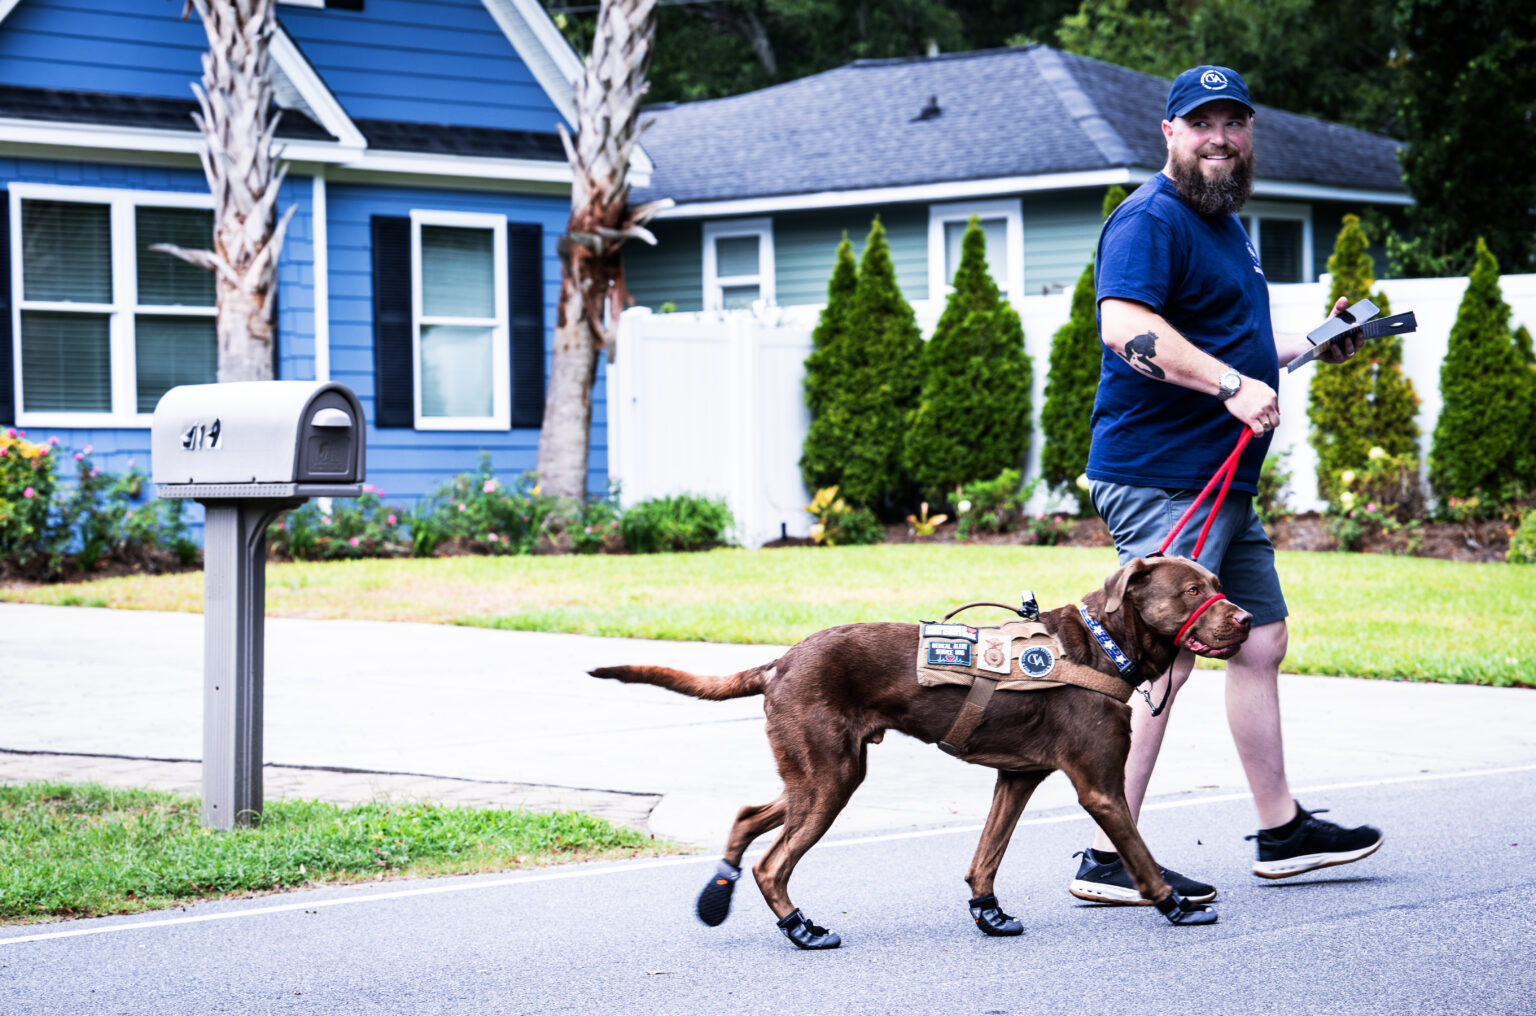 A picture of Robinson walking his service dog. They are near a blue house with a mailbox.